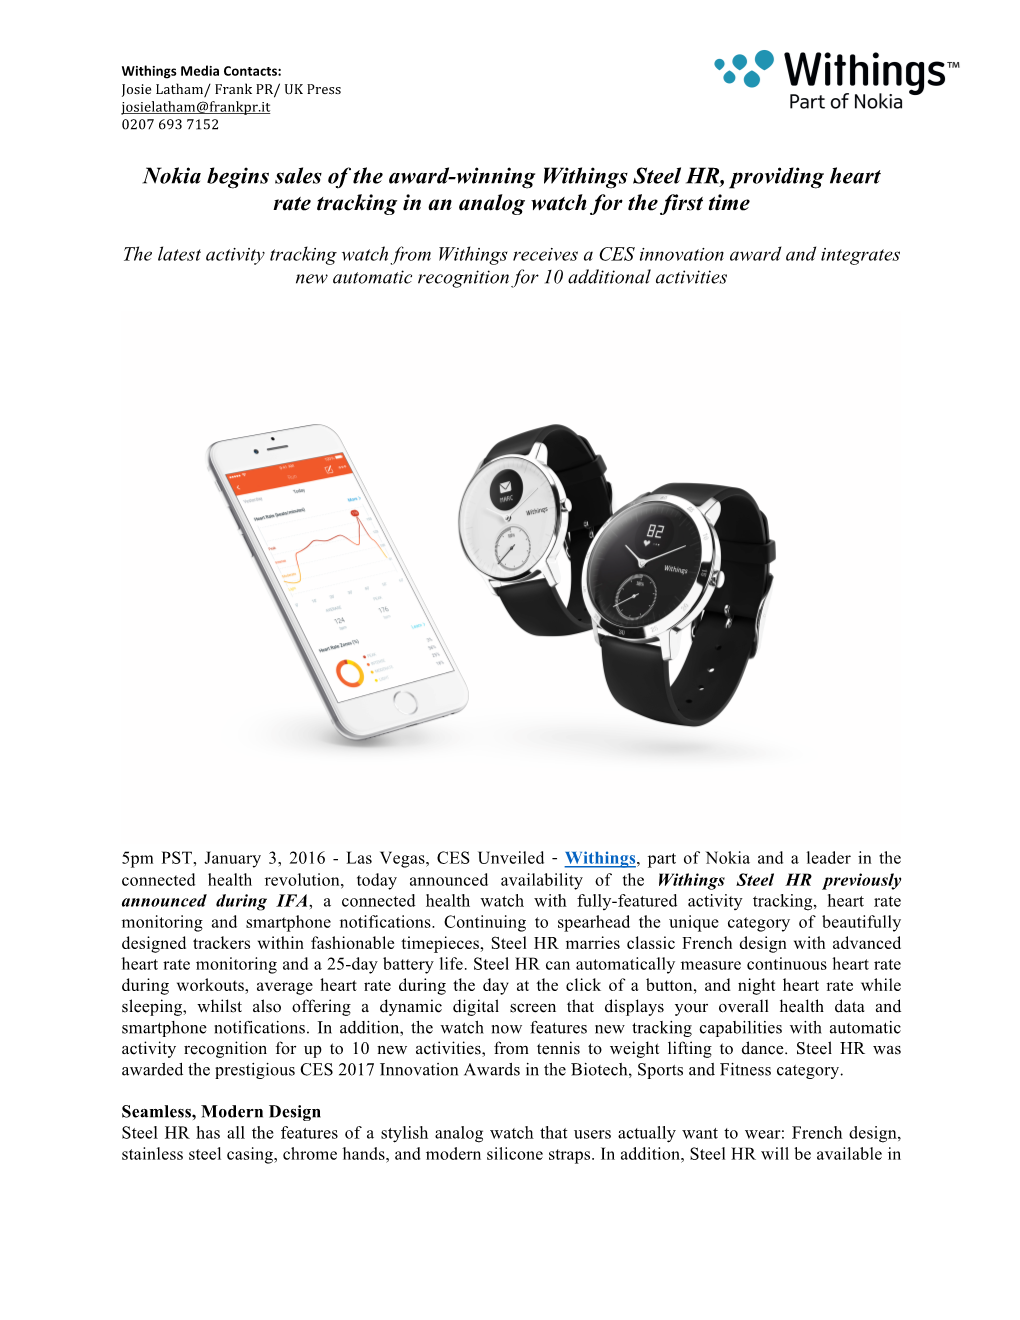 Nokia Begins Sales of the Award-Winning Withings Steel HR, Providing Heart Rate Tracking in an Analog Watch for the First Time